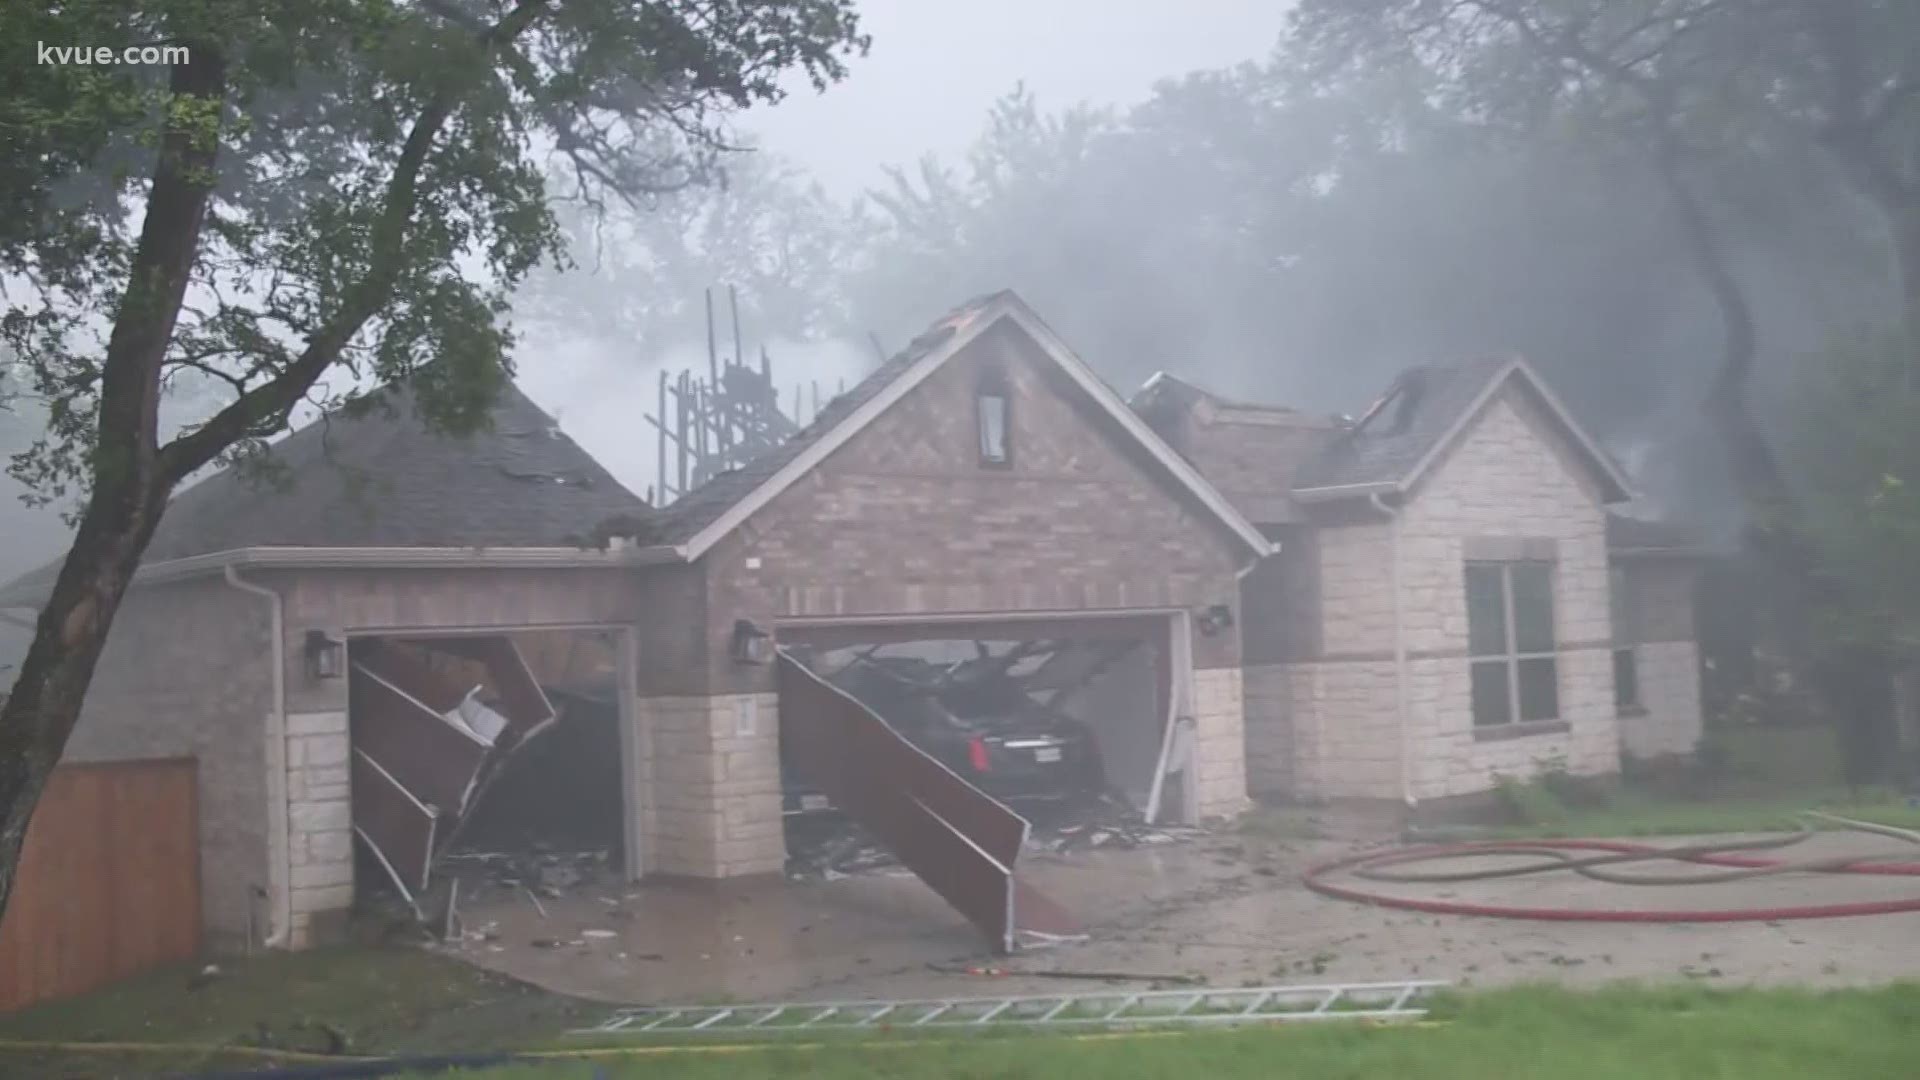 Firefighters are working on a house fire just off I-35 in South Austin.